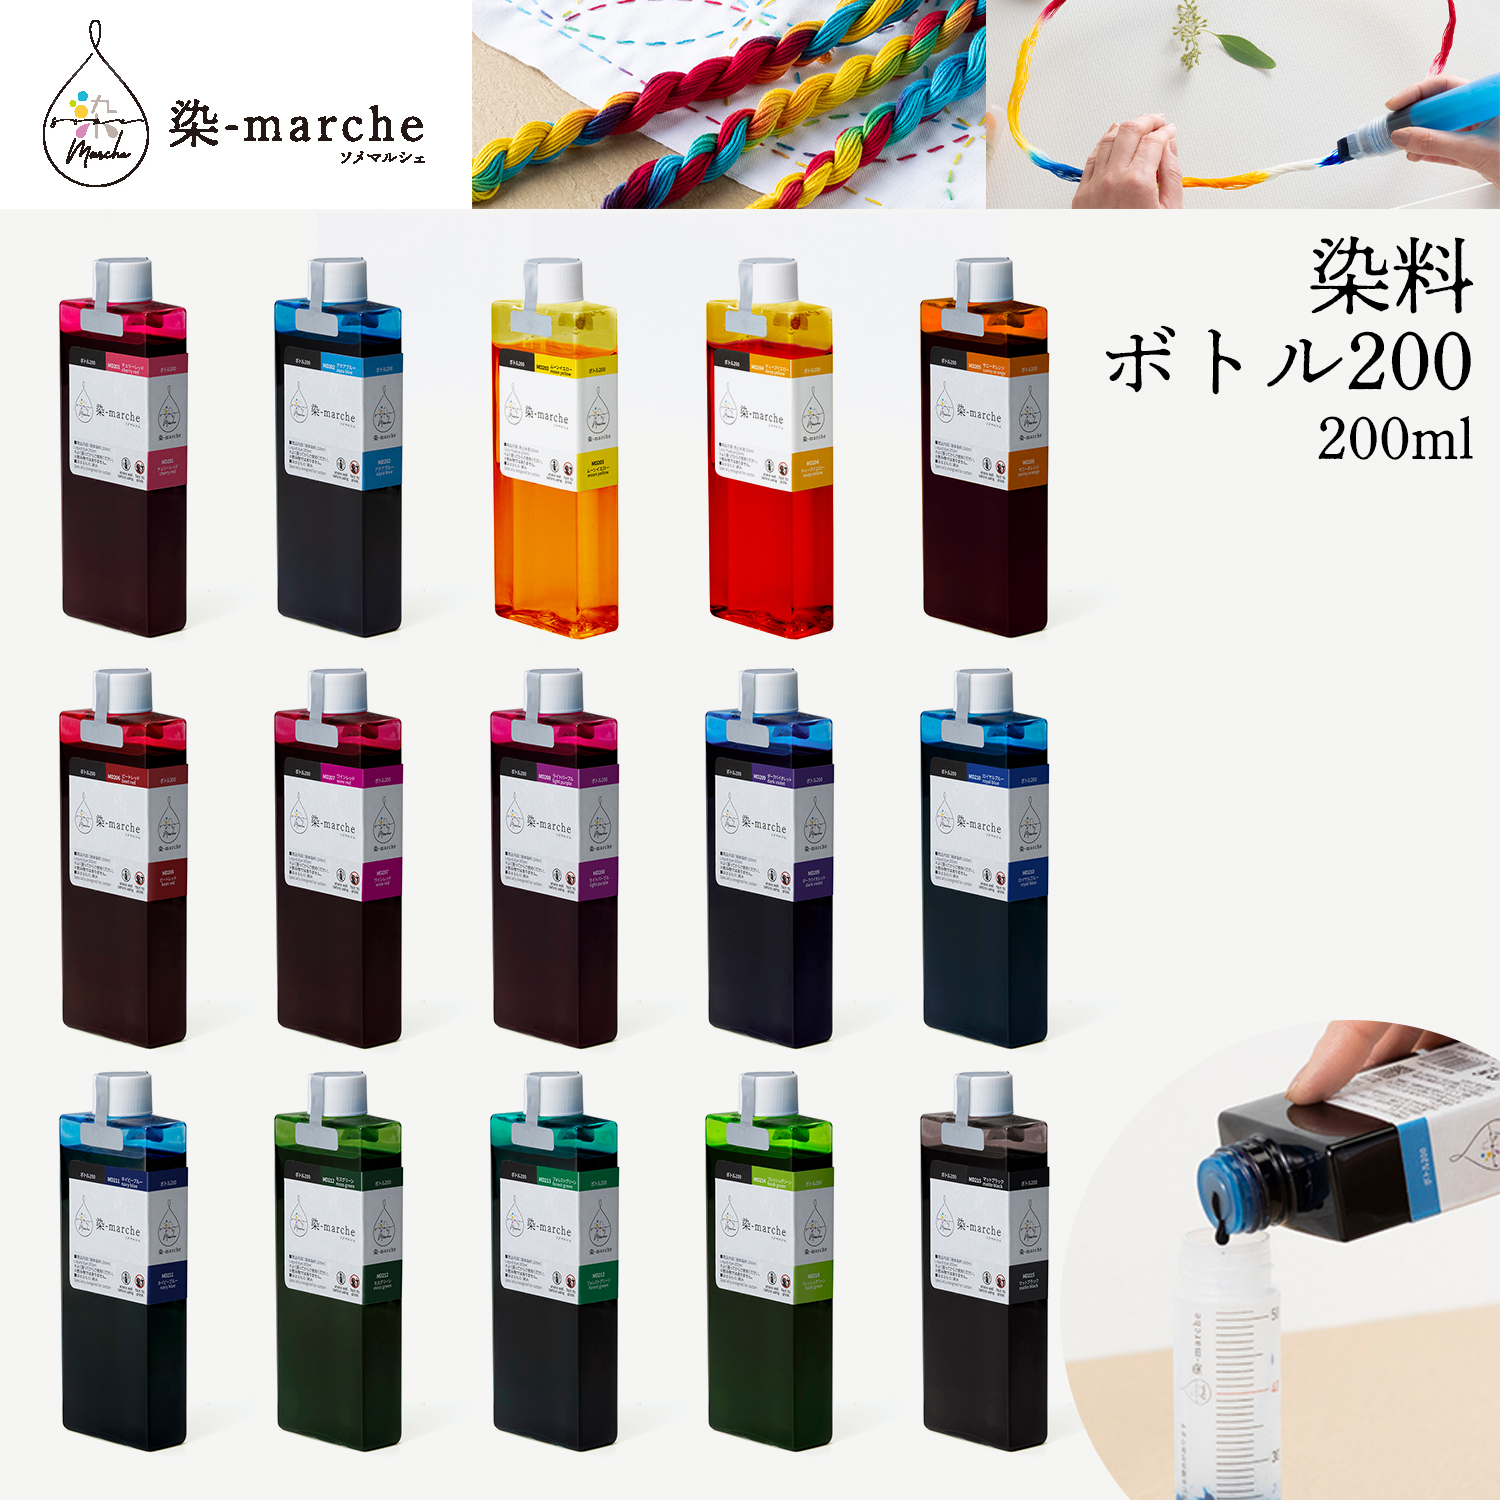 [Order upon demand, not returnable]OLY-MD201 "Some-marche" Bottle 200 200ml 3 piece unit (pcs)